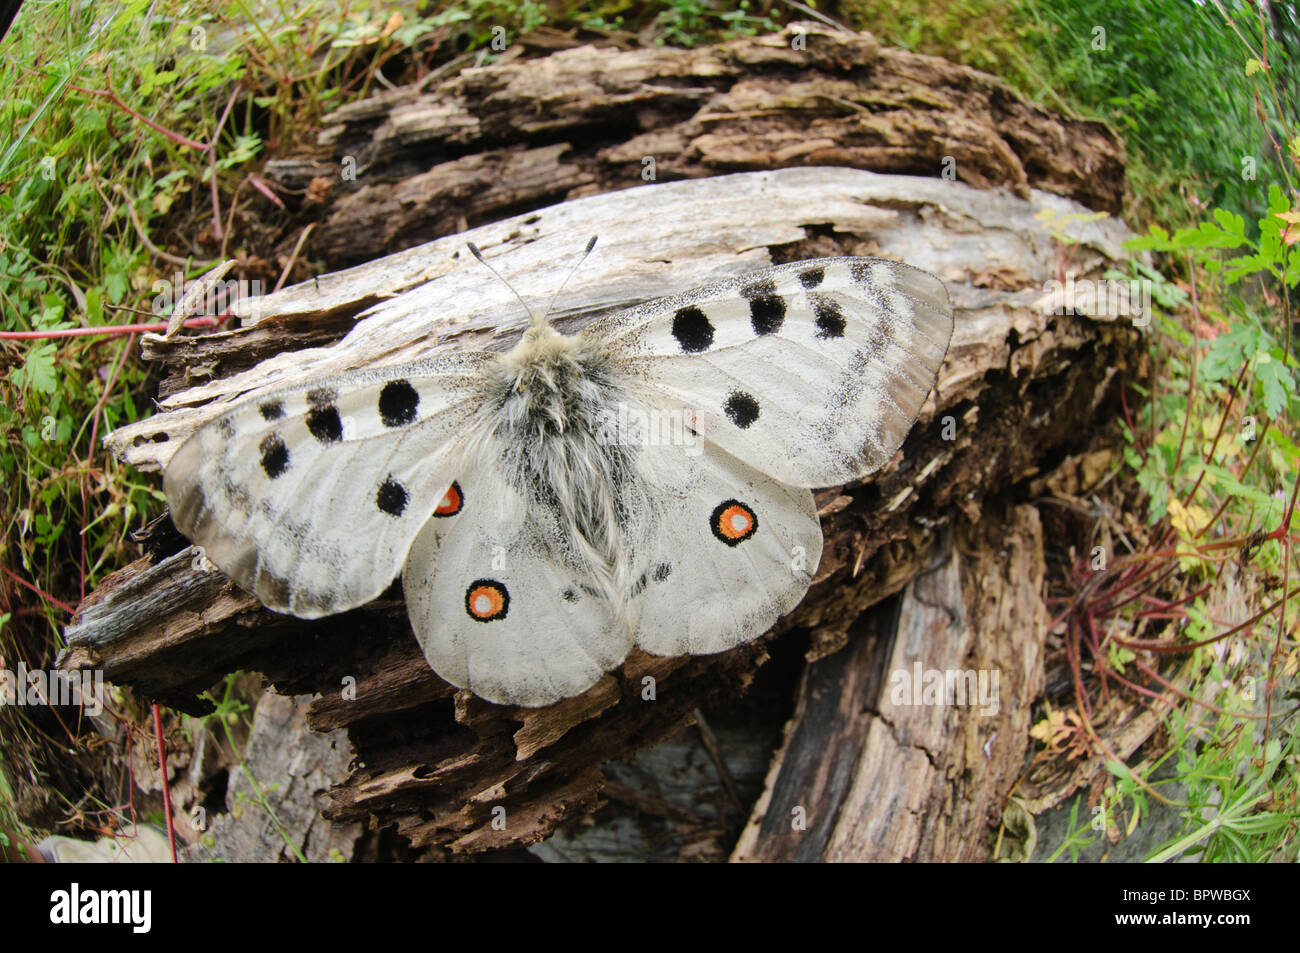 Parnassius apollo is in Southern Europe confined to high mountain areas mostly in the Pyrenees where it was confined at the end of the glacial era. It is a large, shiny, translucid and friendly species with a very distinctive flight behaviour. Stock Photo